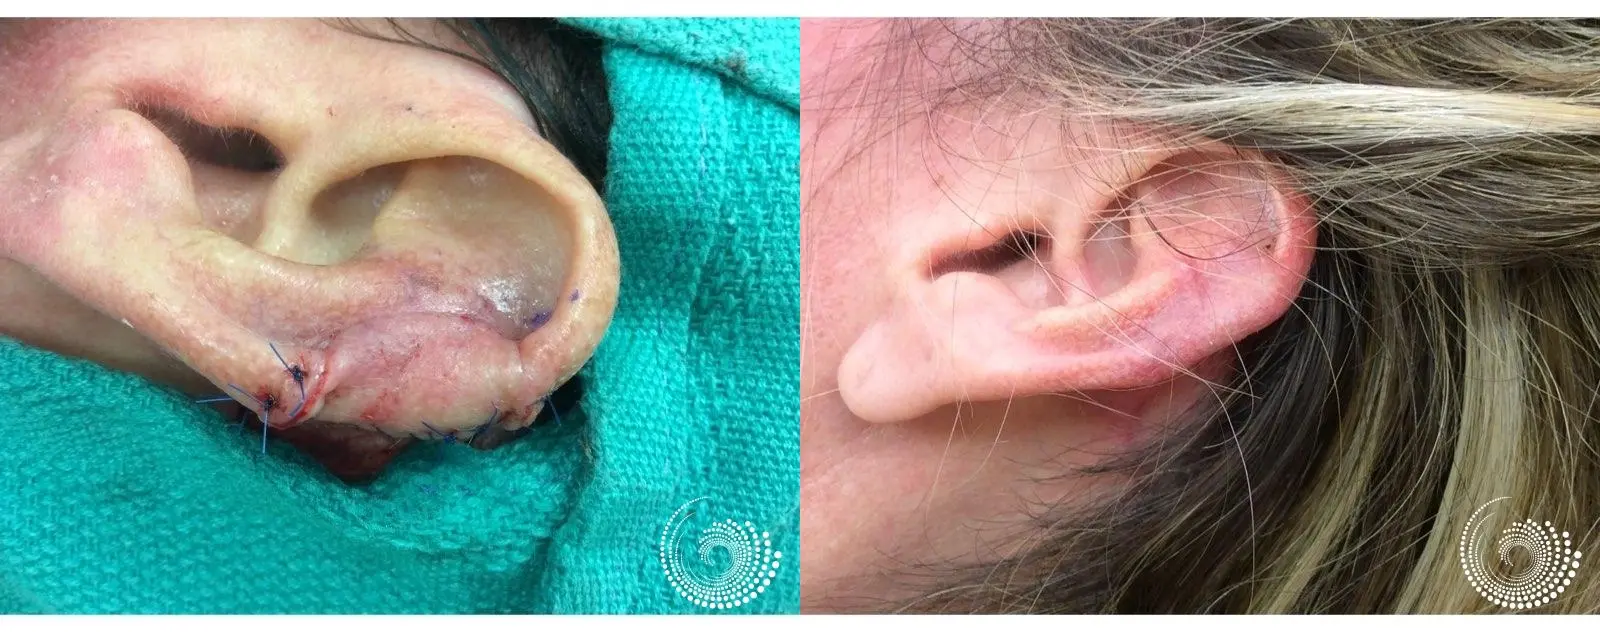 Basal Cell skin cancer, located on the ear - Mohs surgery - Before and After 4